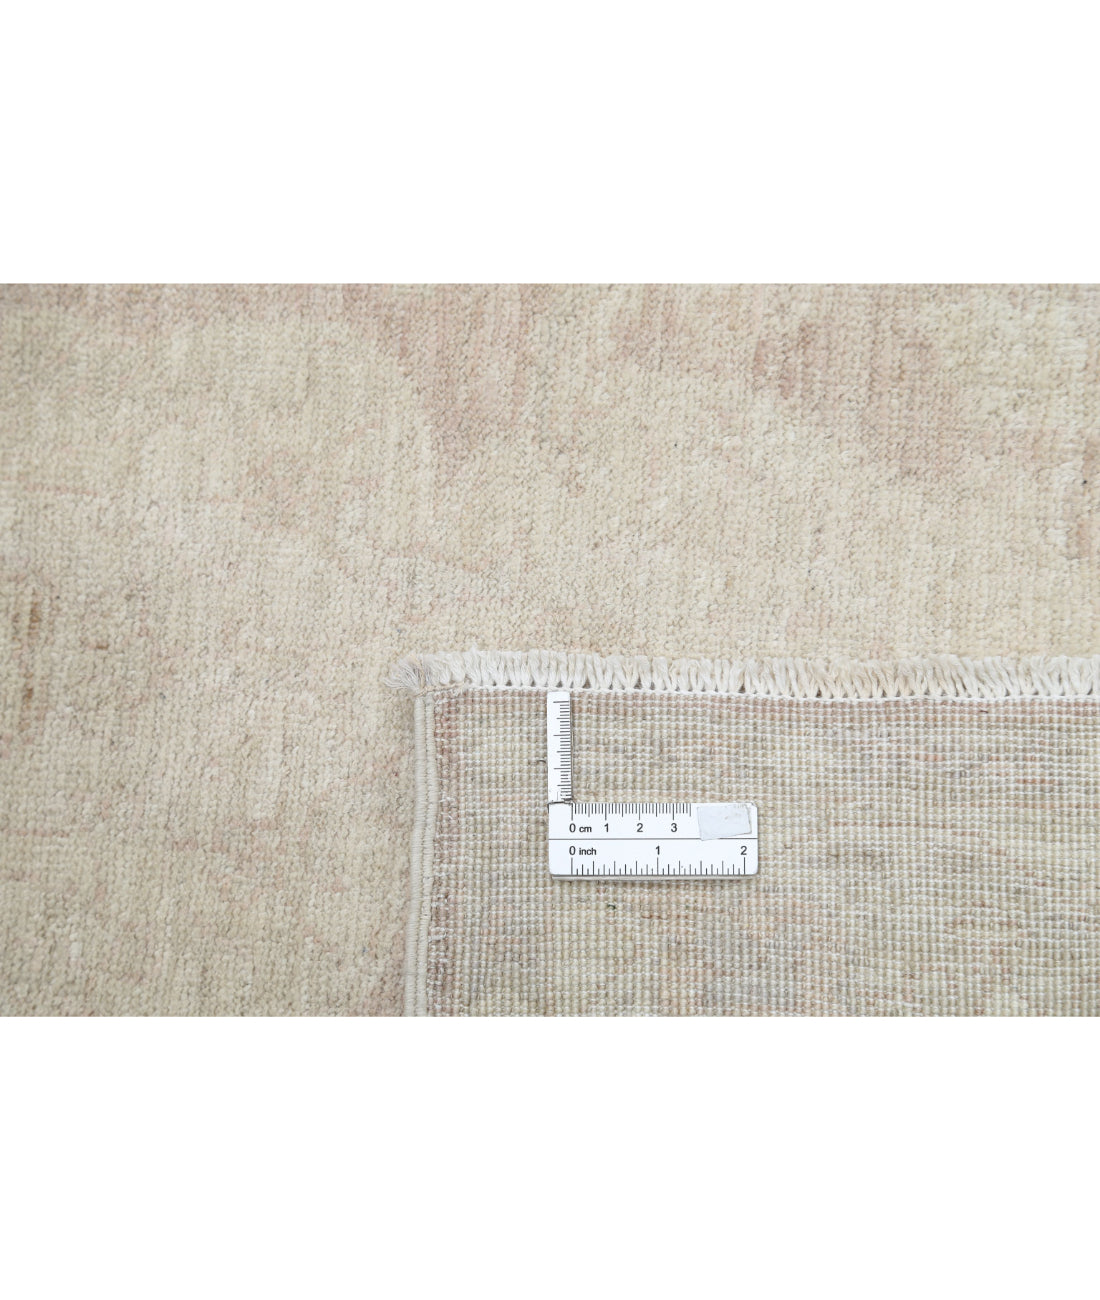 Hand Knotted Serenity Wool Rug - 2'11'' x 4'8'' 2'11'' x 4'8'' (88 X 140) / Pink / Ivory